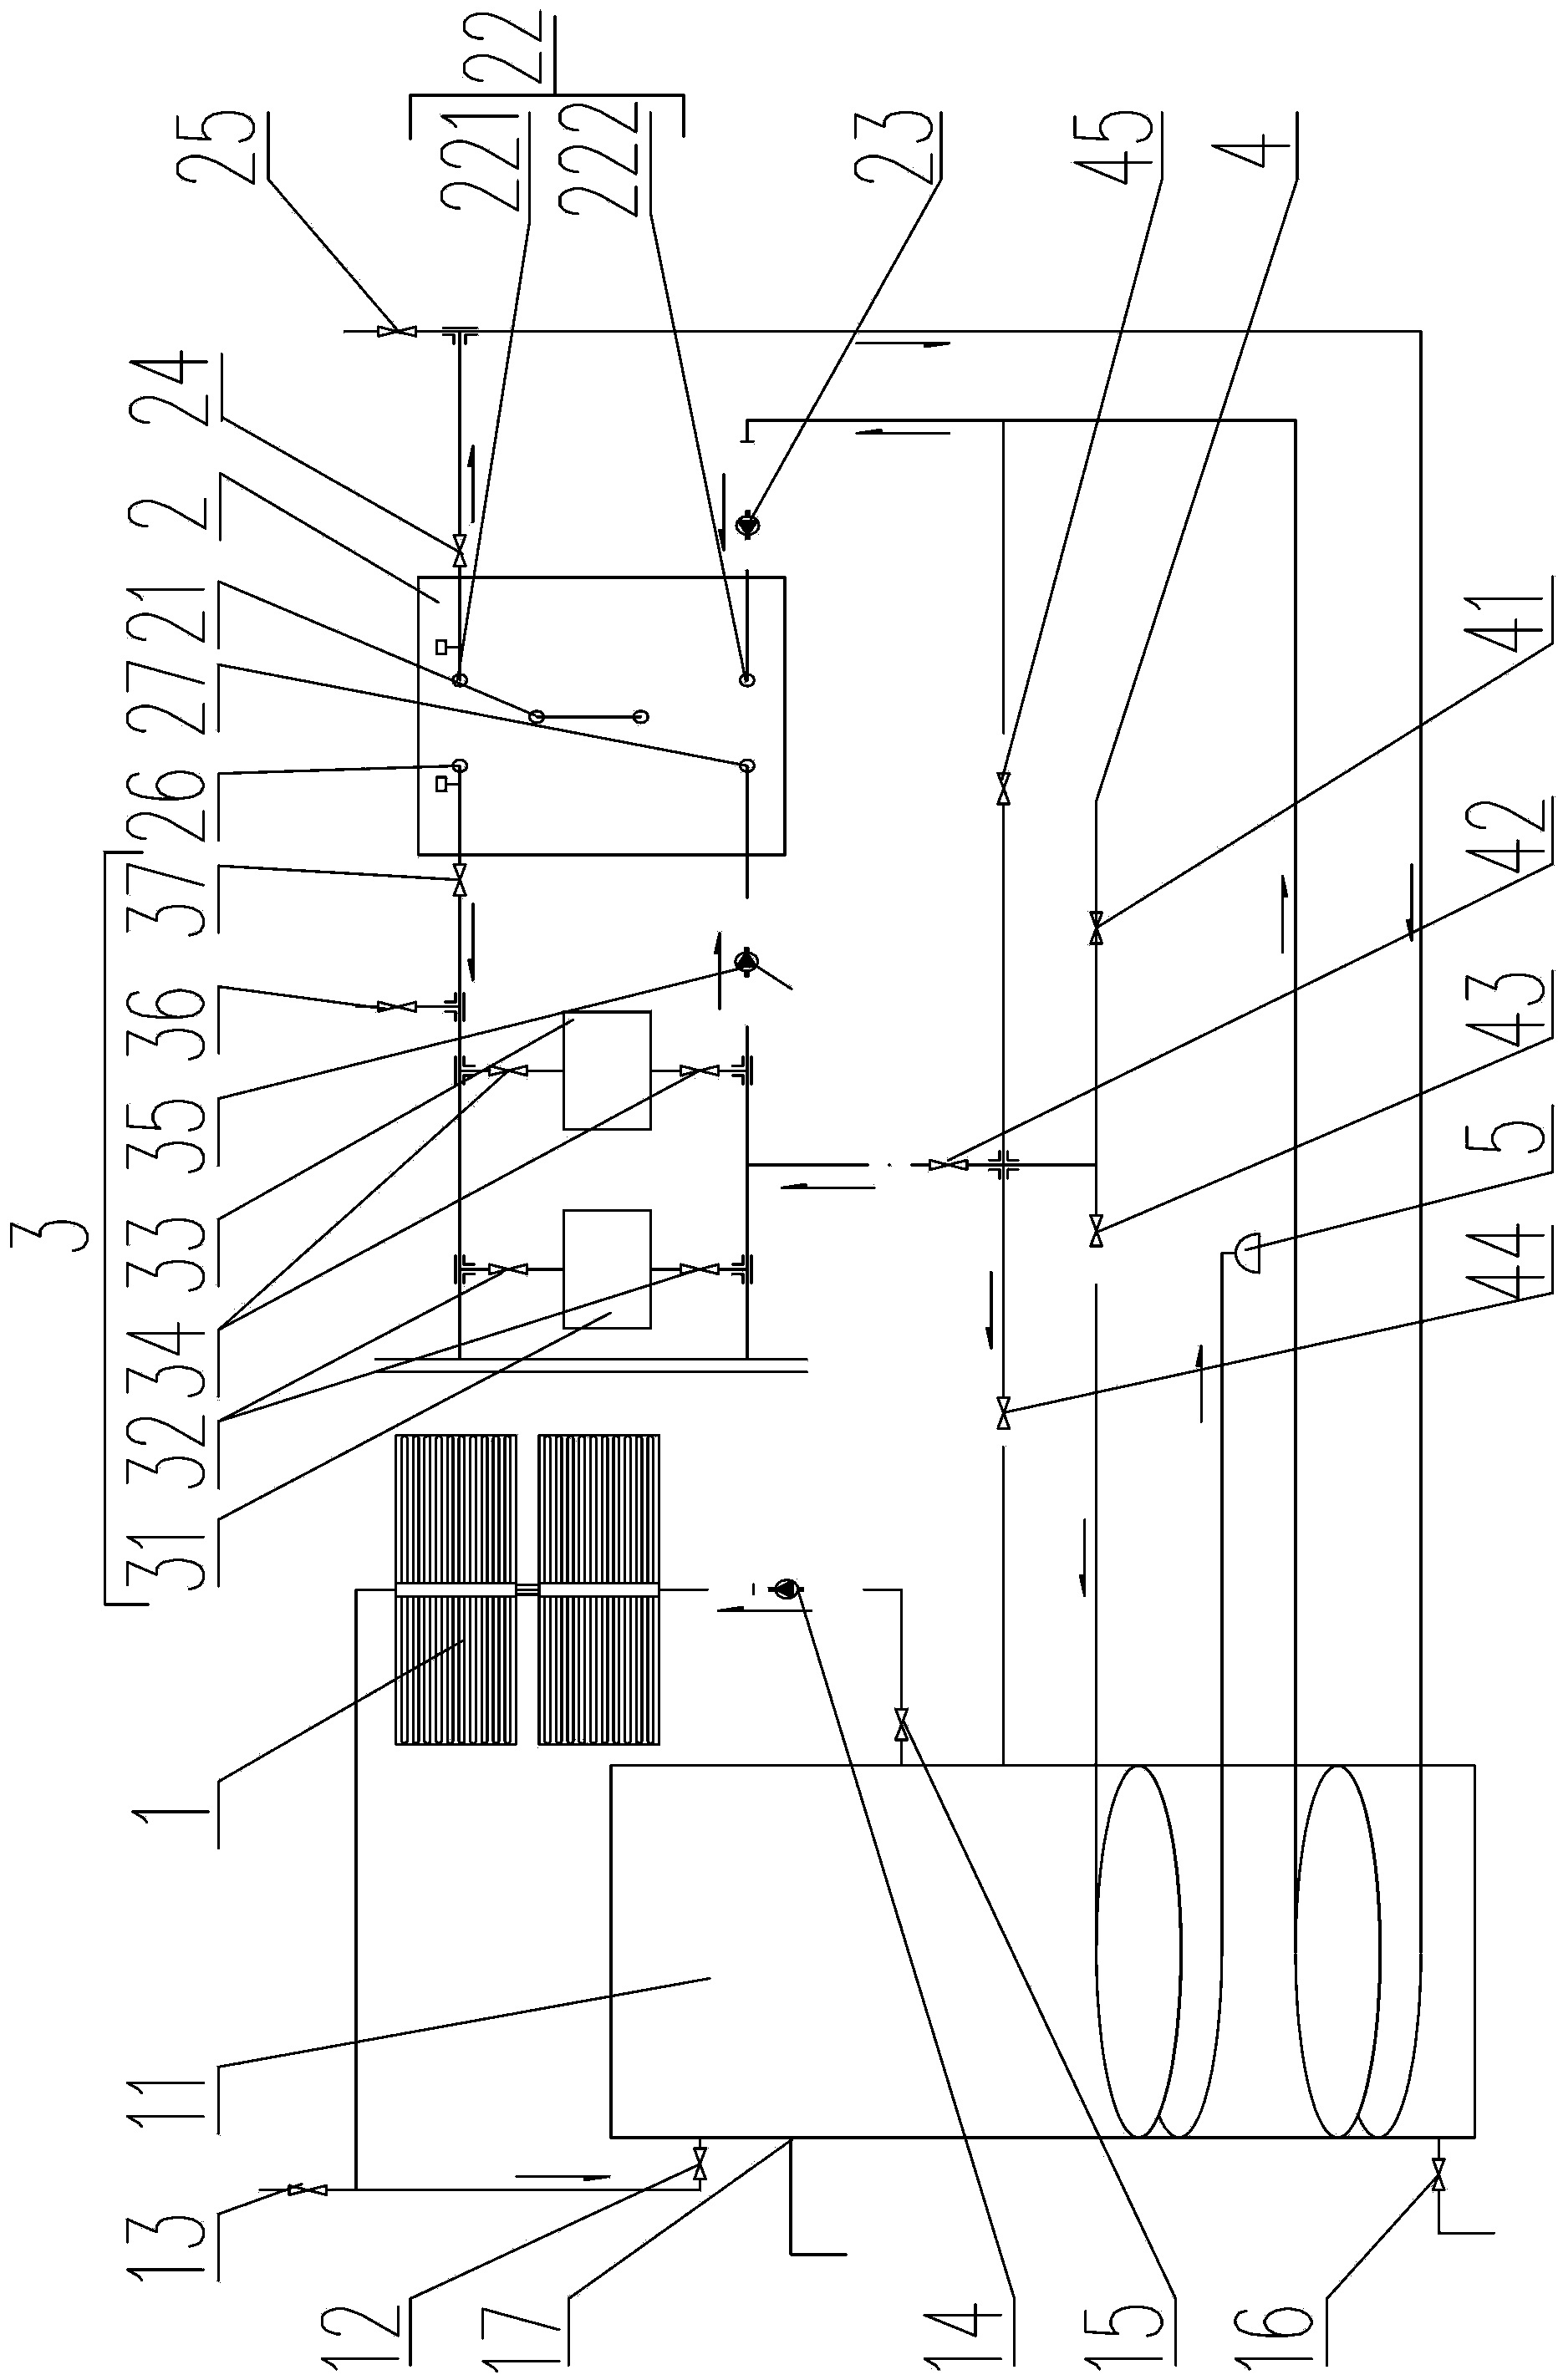 Solar-assisted heat pump combined heating and refrigerating system and method